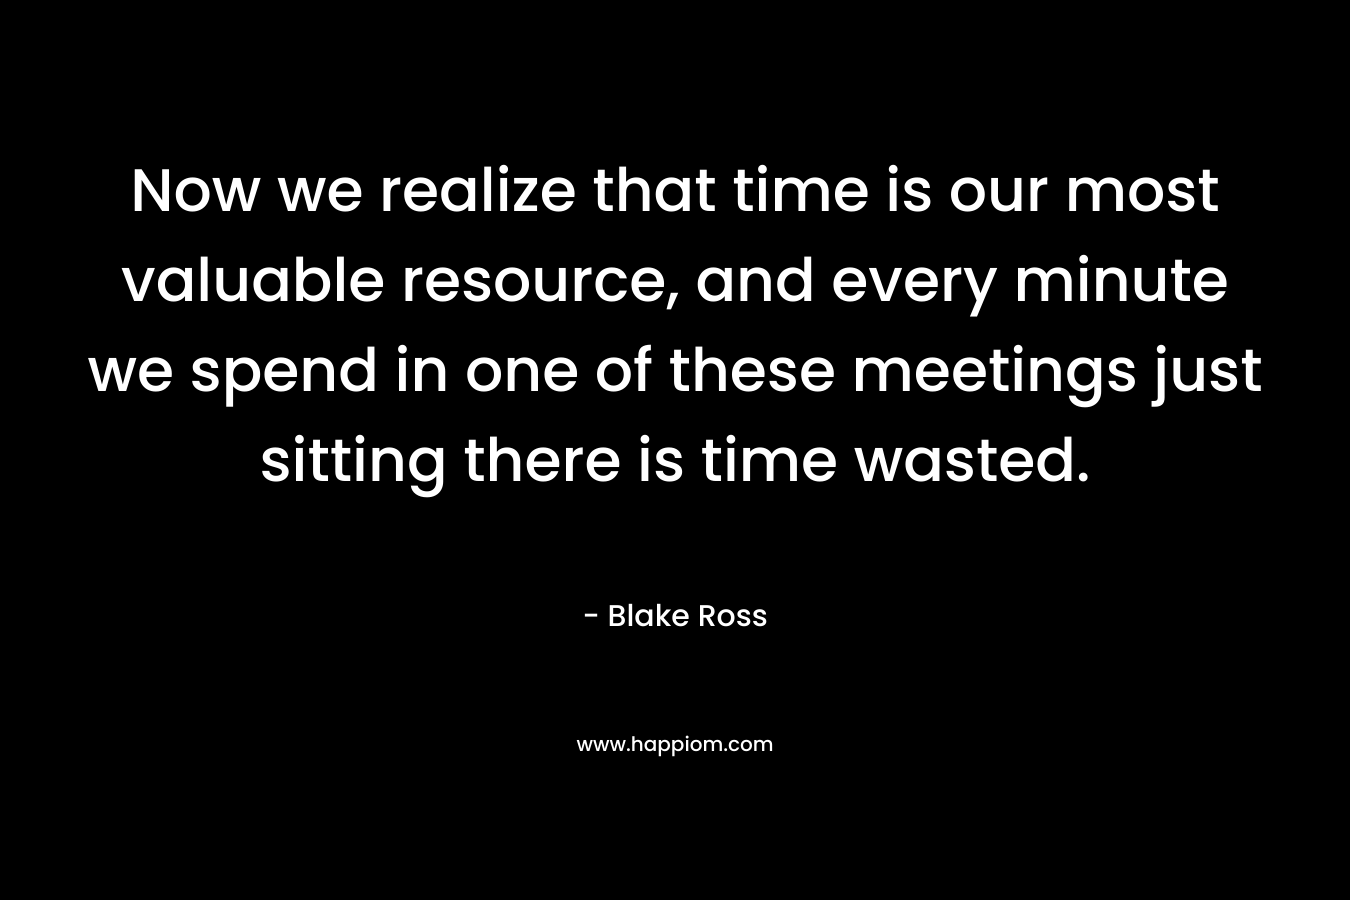 Now we realize that time is our most valuable resource, and every minute we spend in one of these meetings just sitting there is time wasted. – Blake Ross